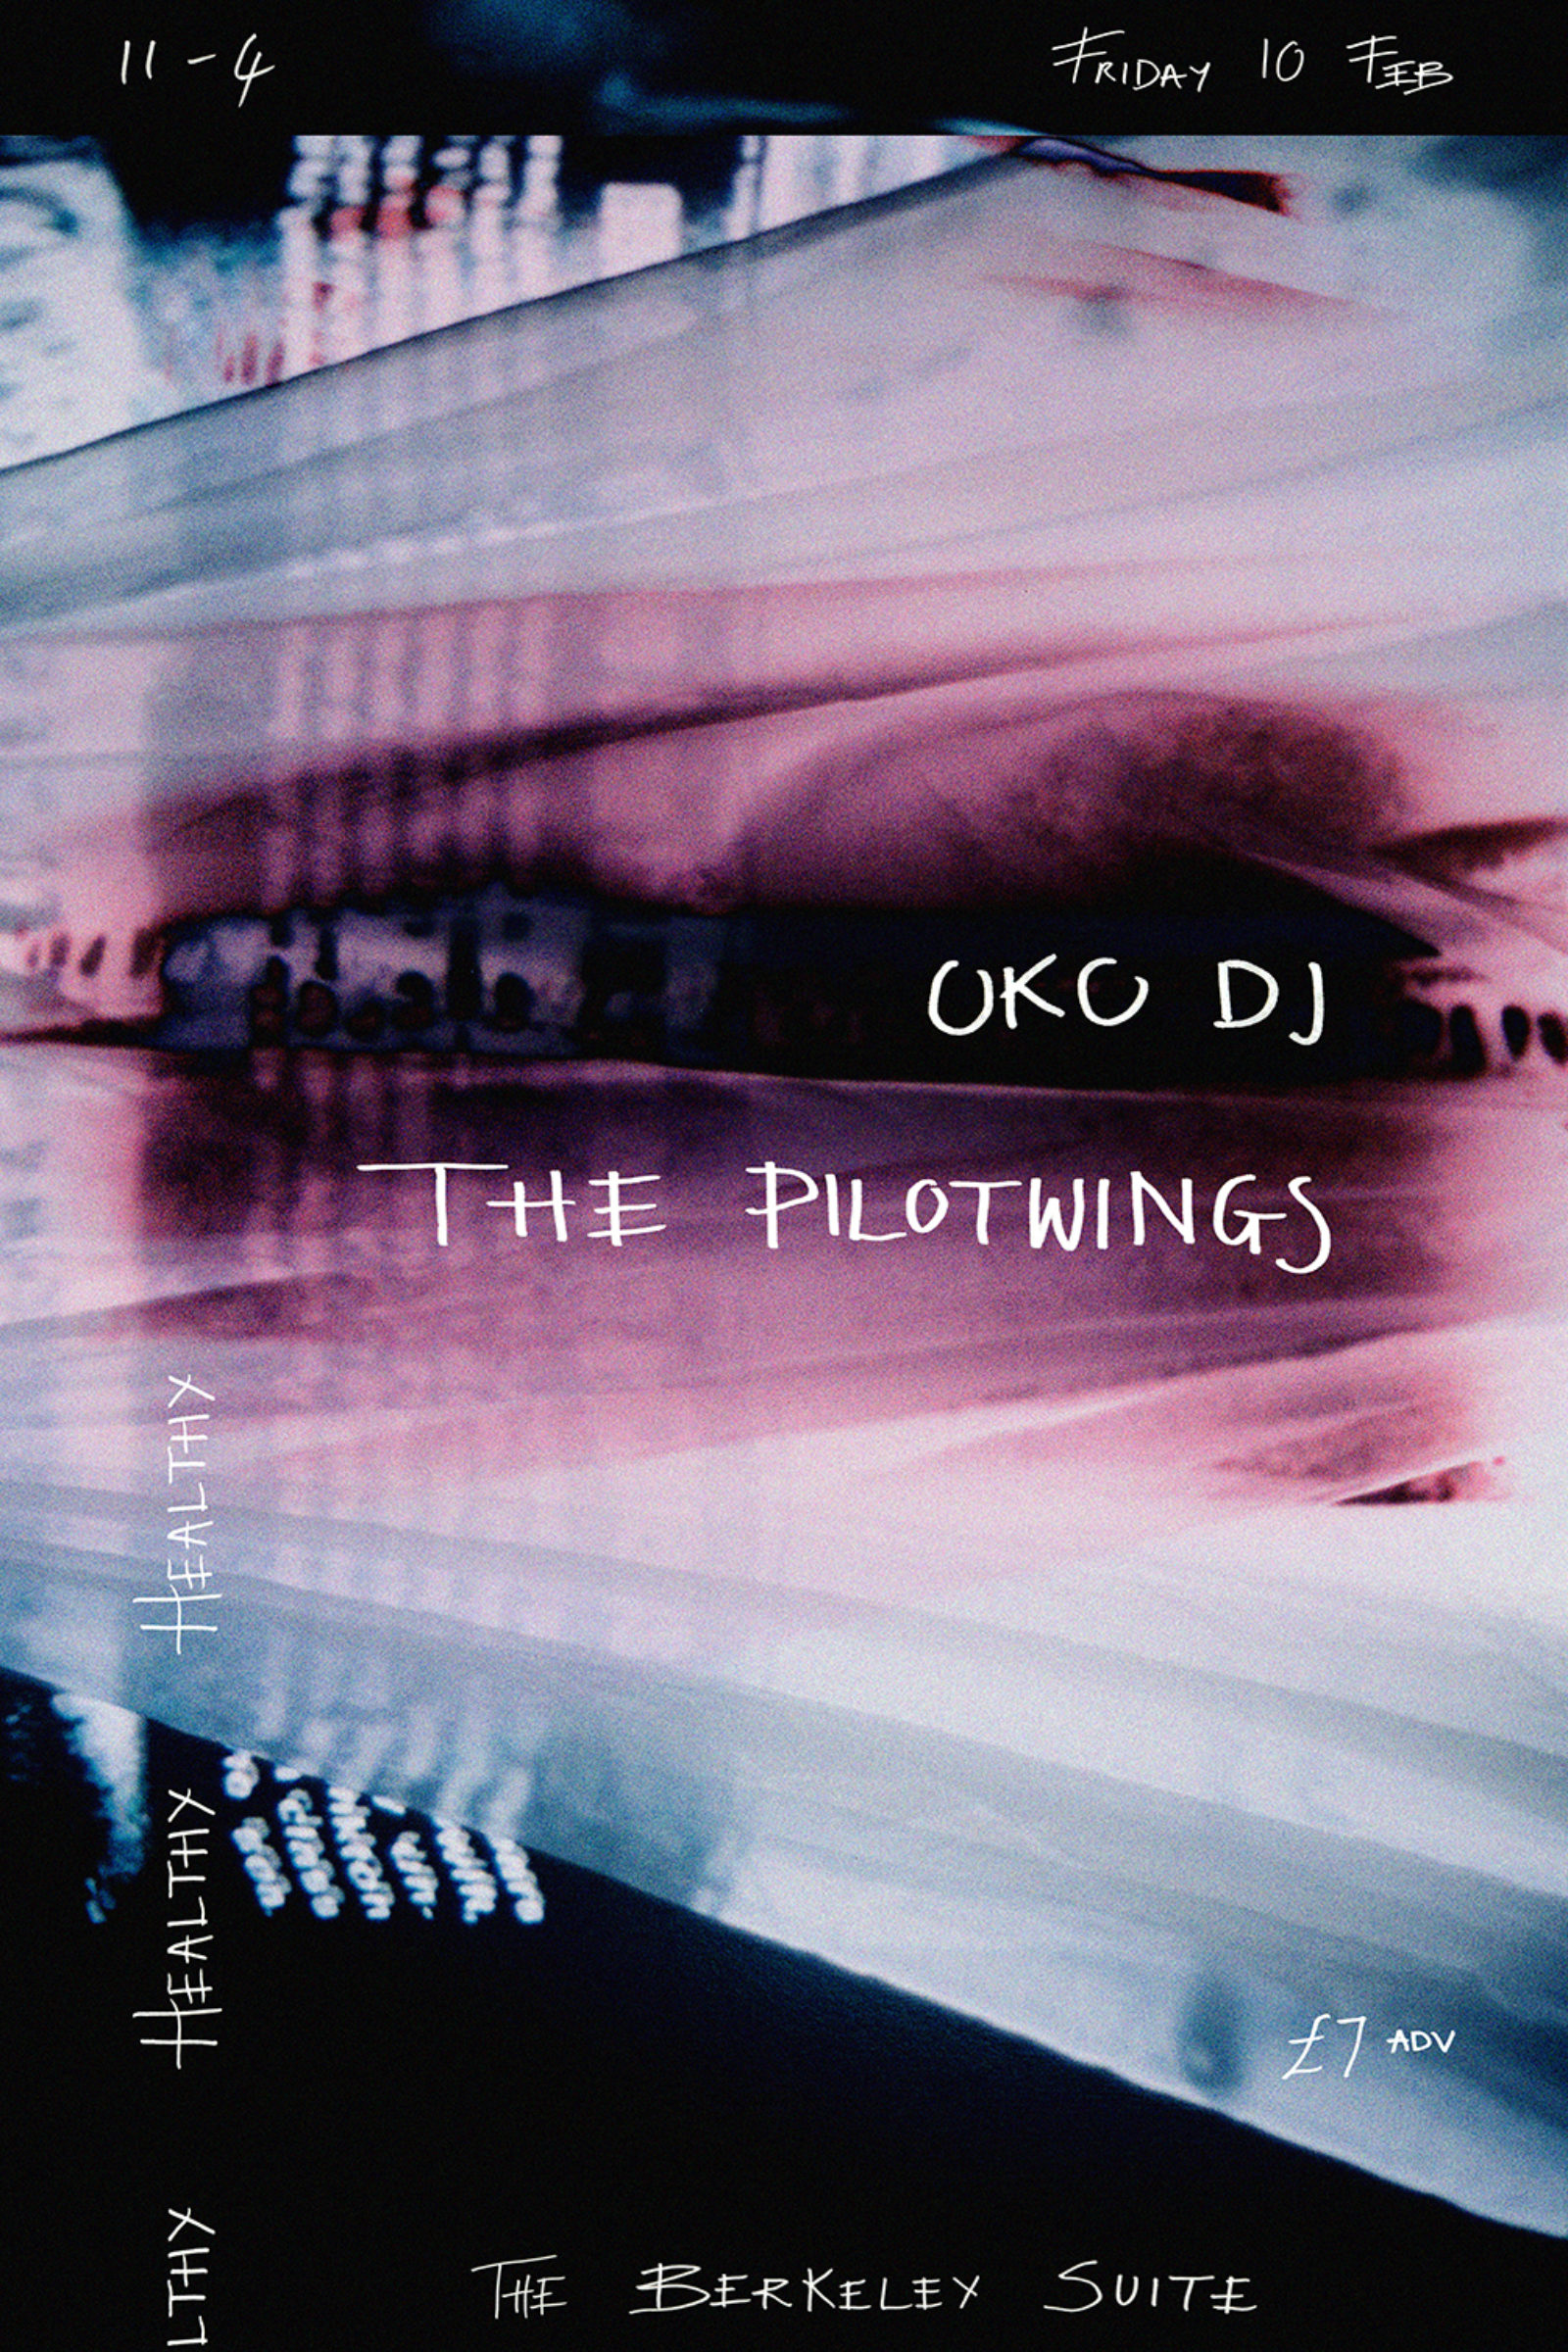 Healthy with The Pilotwings & OKO DJ